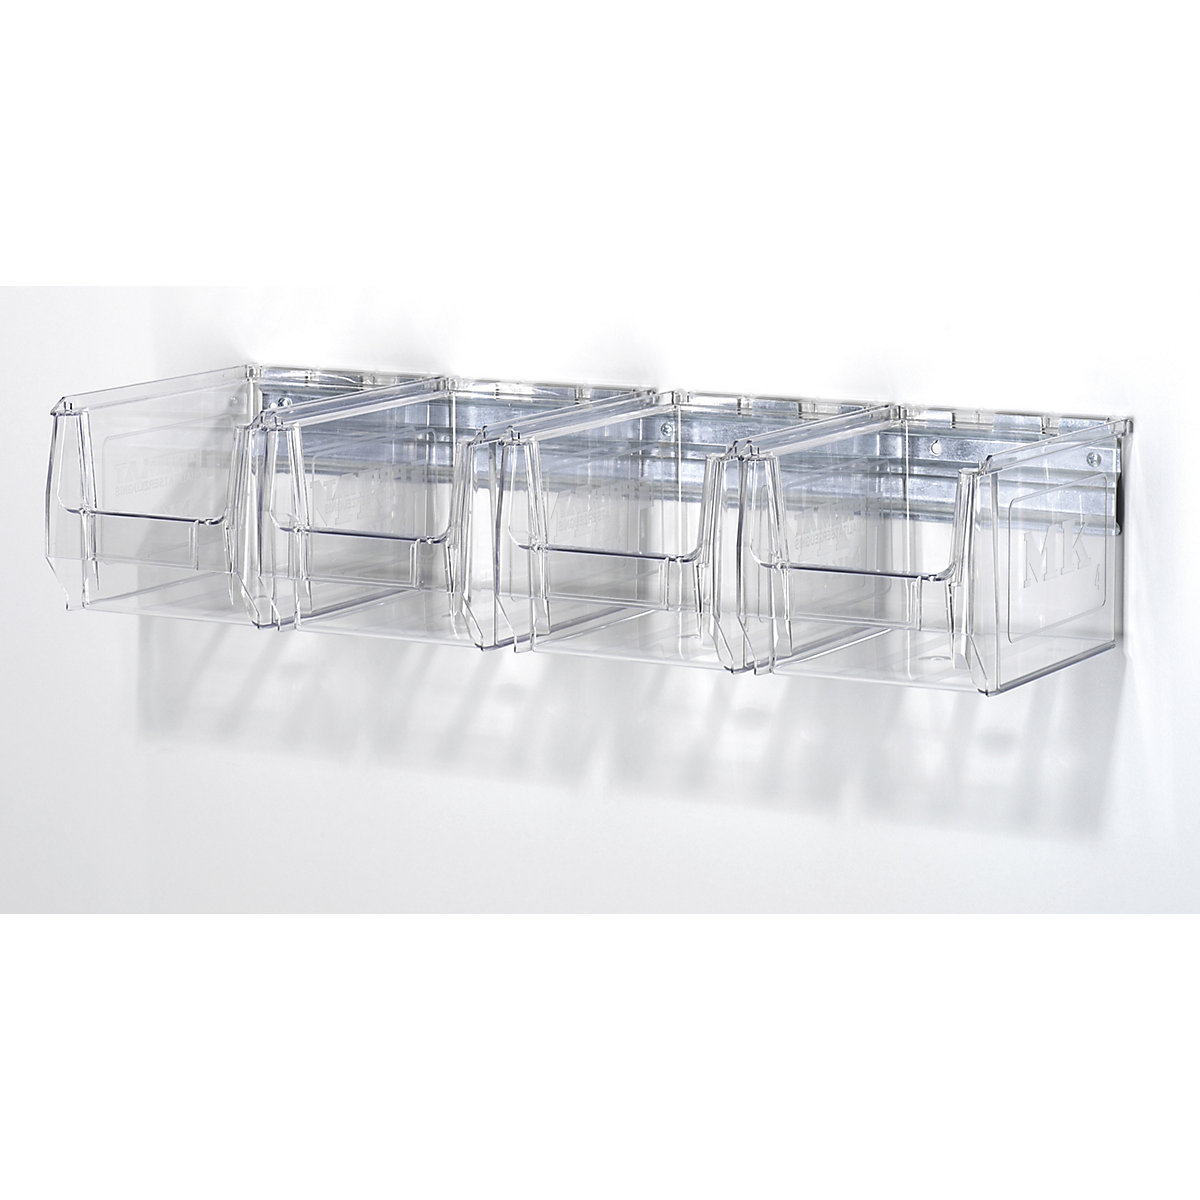 Wall mounted rail with open fronted storage bins – mauser, crystal clear, length 600 mm, 4 bins-4